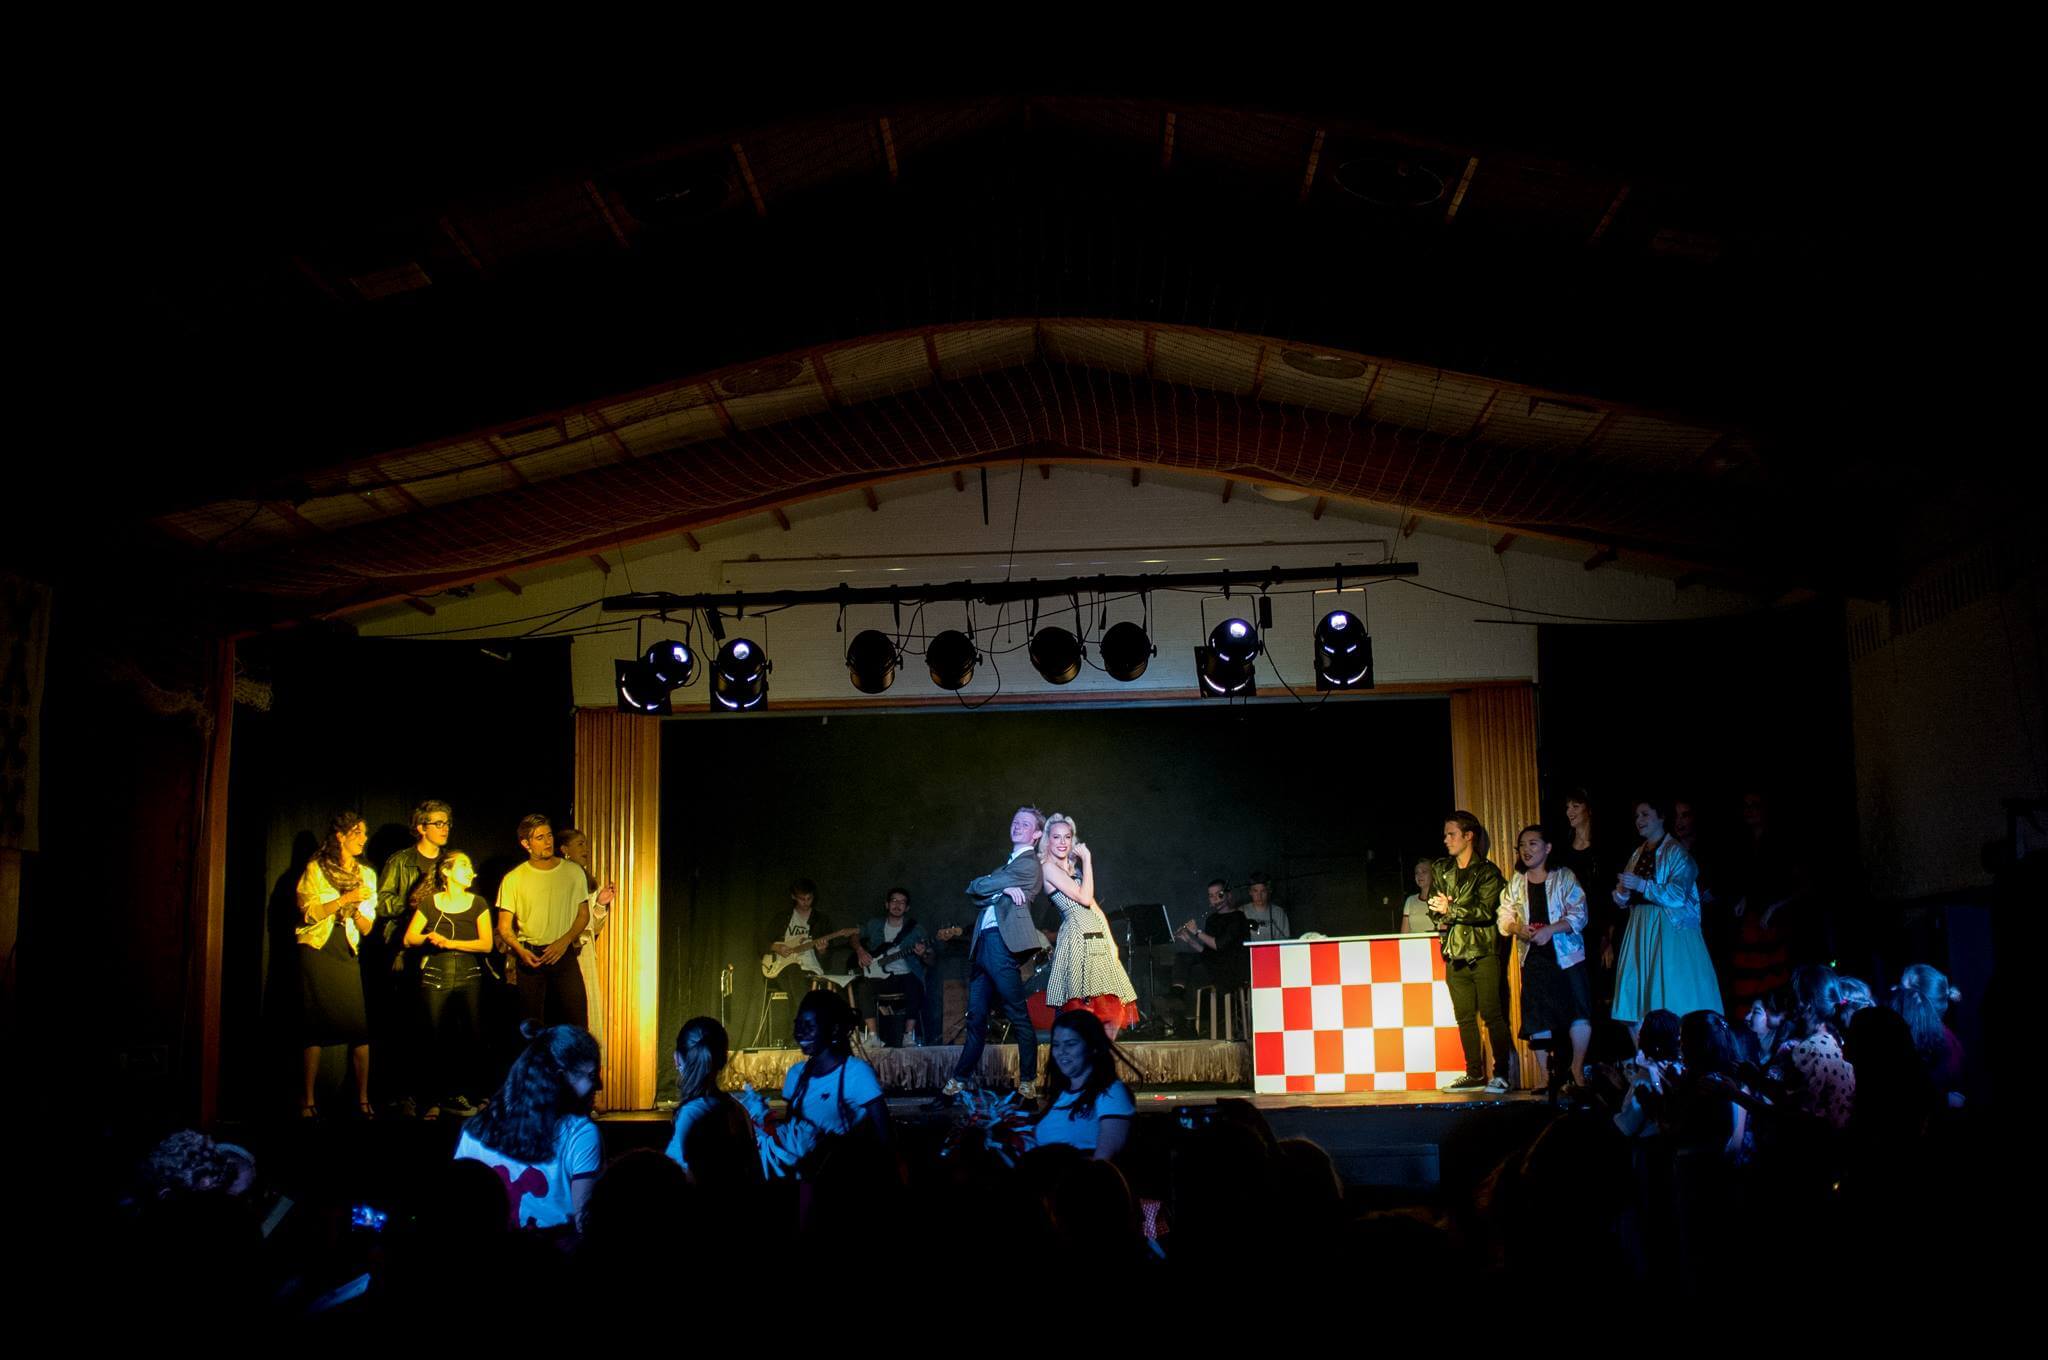 folk high school musical Grease at International people's college in Denmark